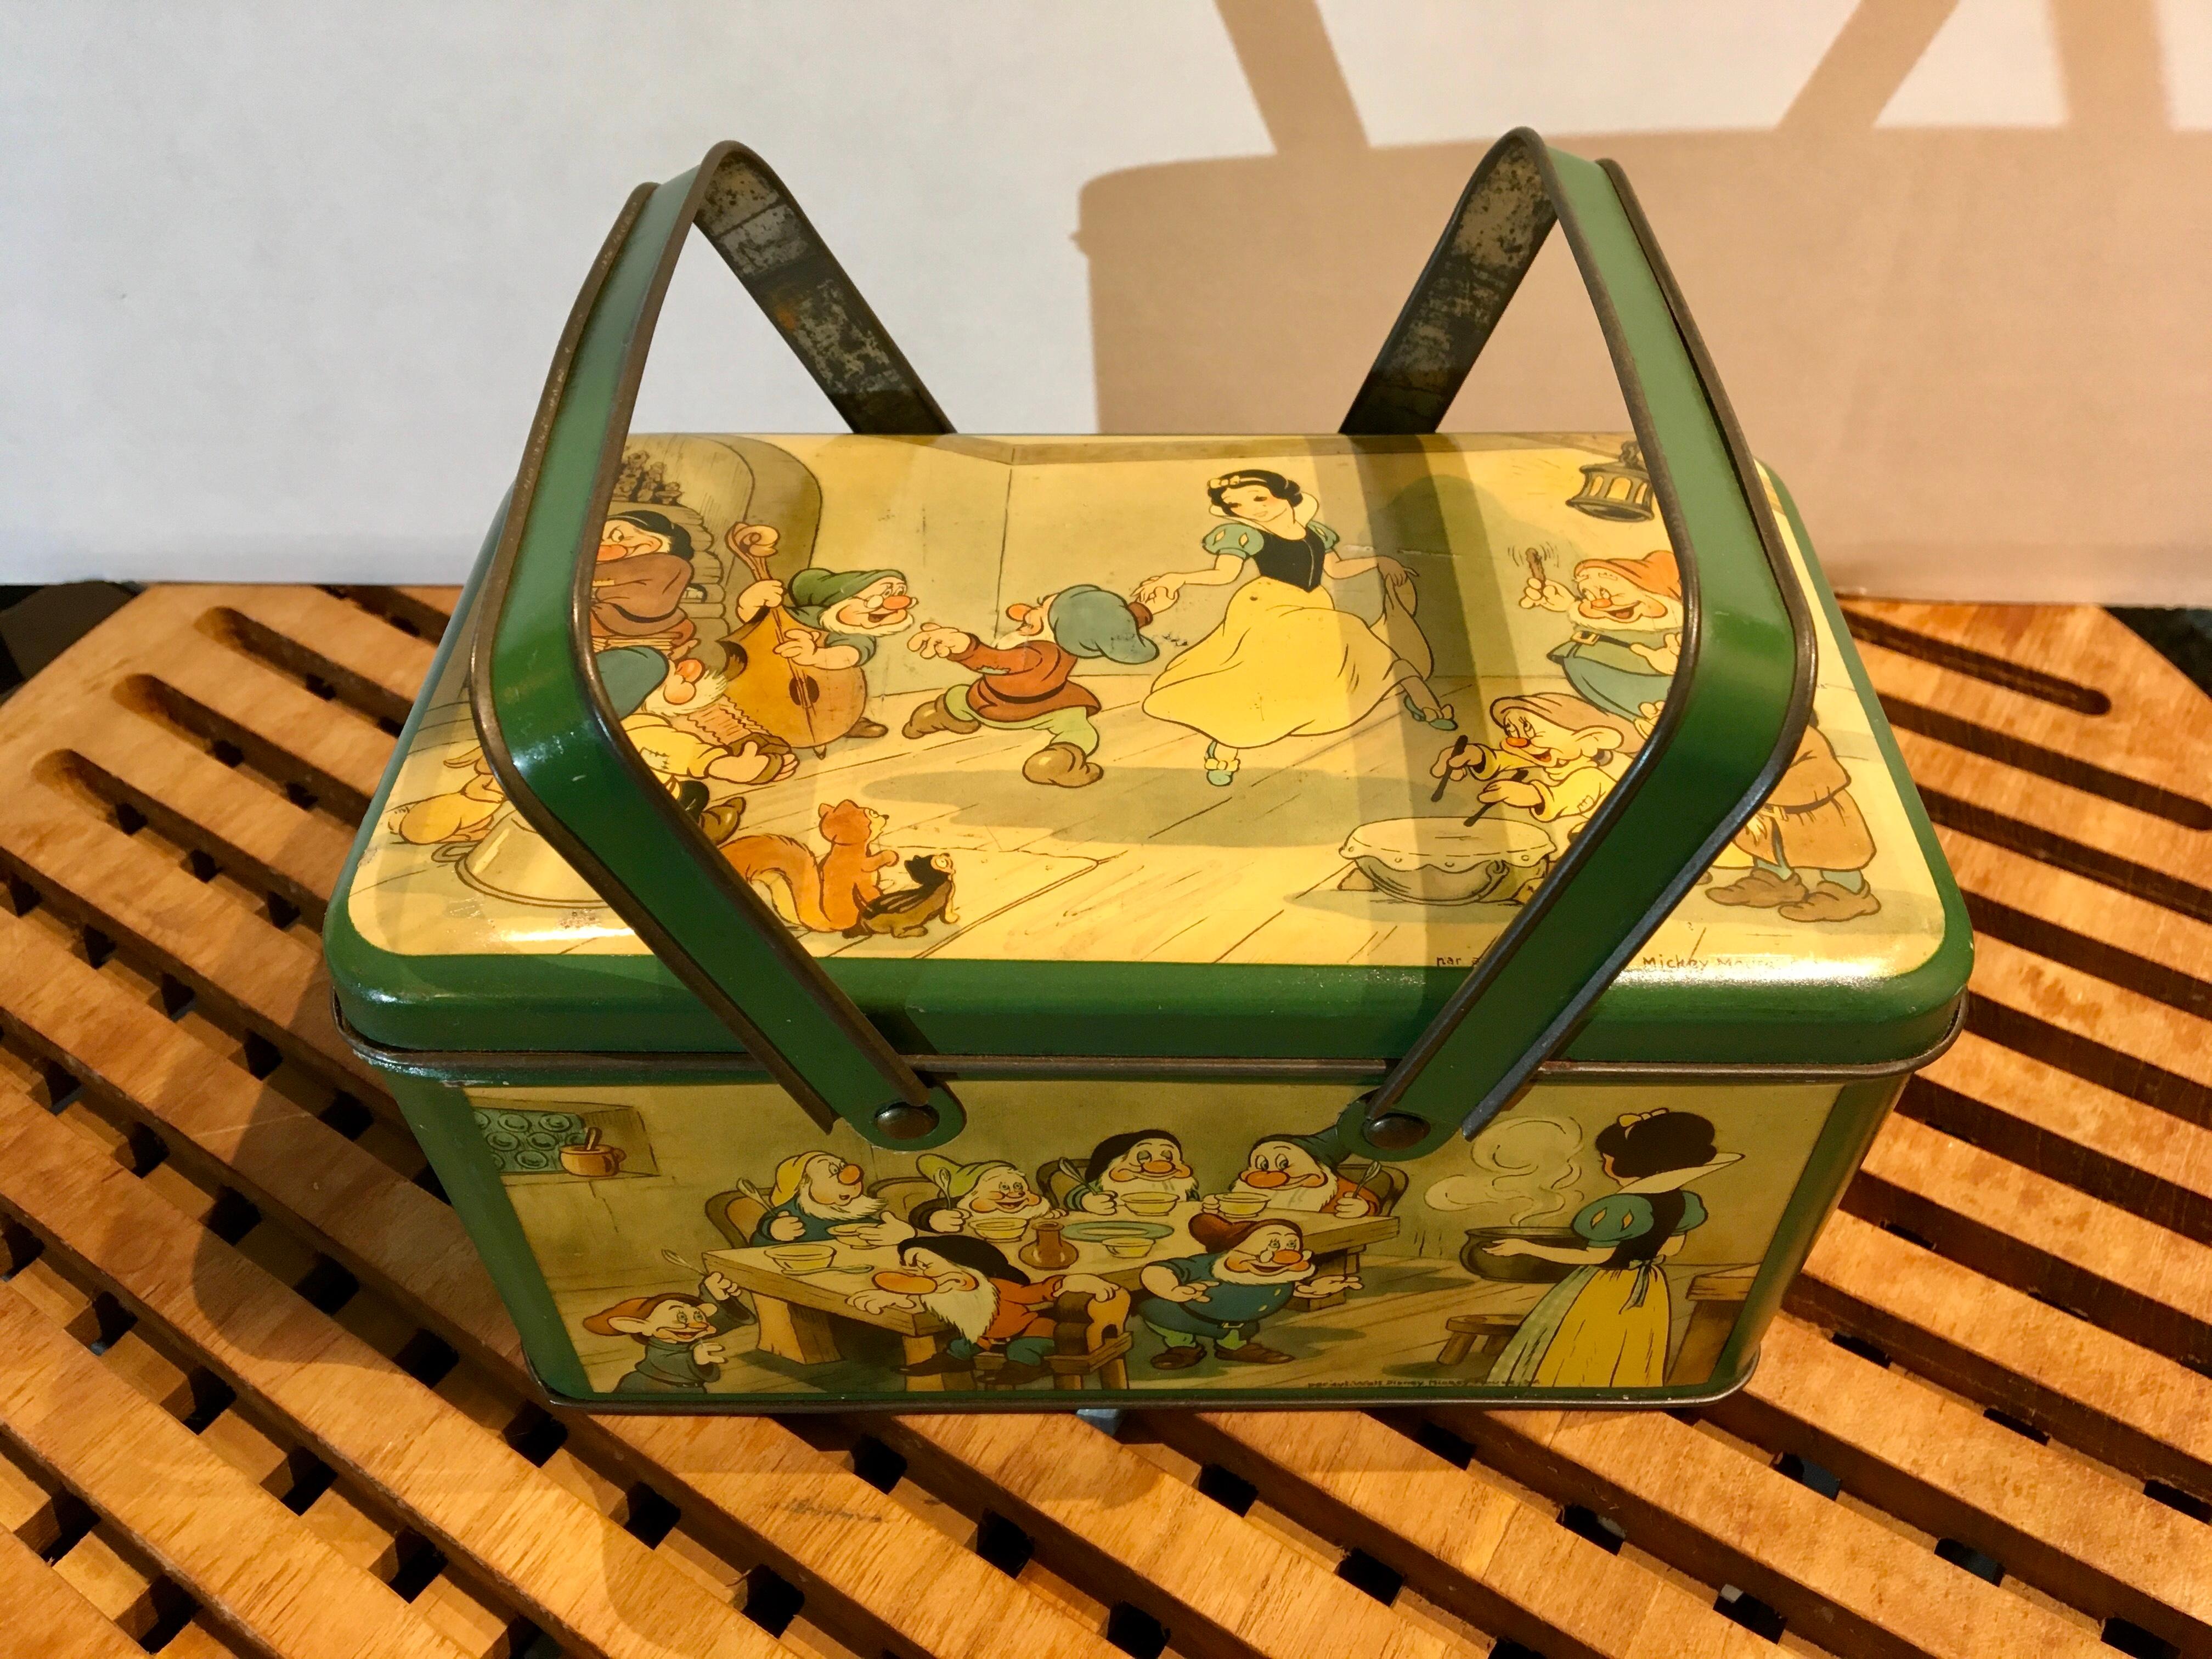 Disney tin with handle with Snow White and the 7 dwarfs. 
A green rectangular tin with lid with different scenes of Snow White , the seven dwarfs and the Prince on his white horse.
Made under licence of Walt Disney for the European market. 
Marked